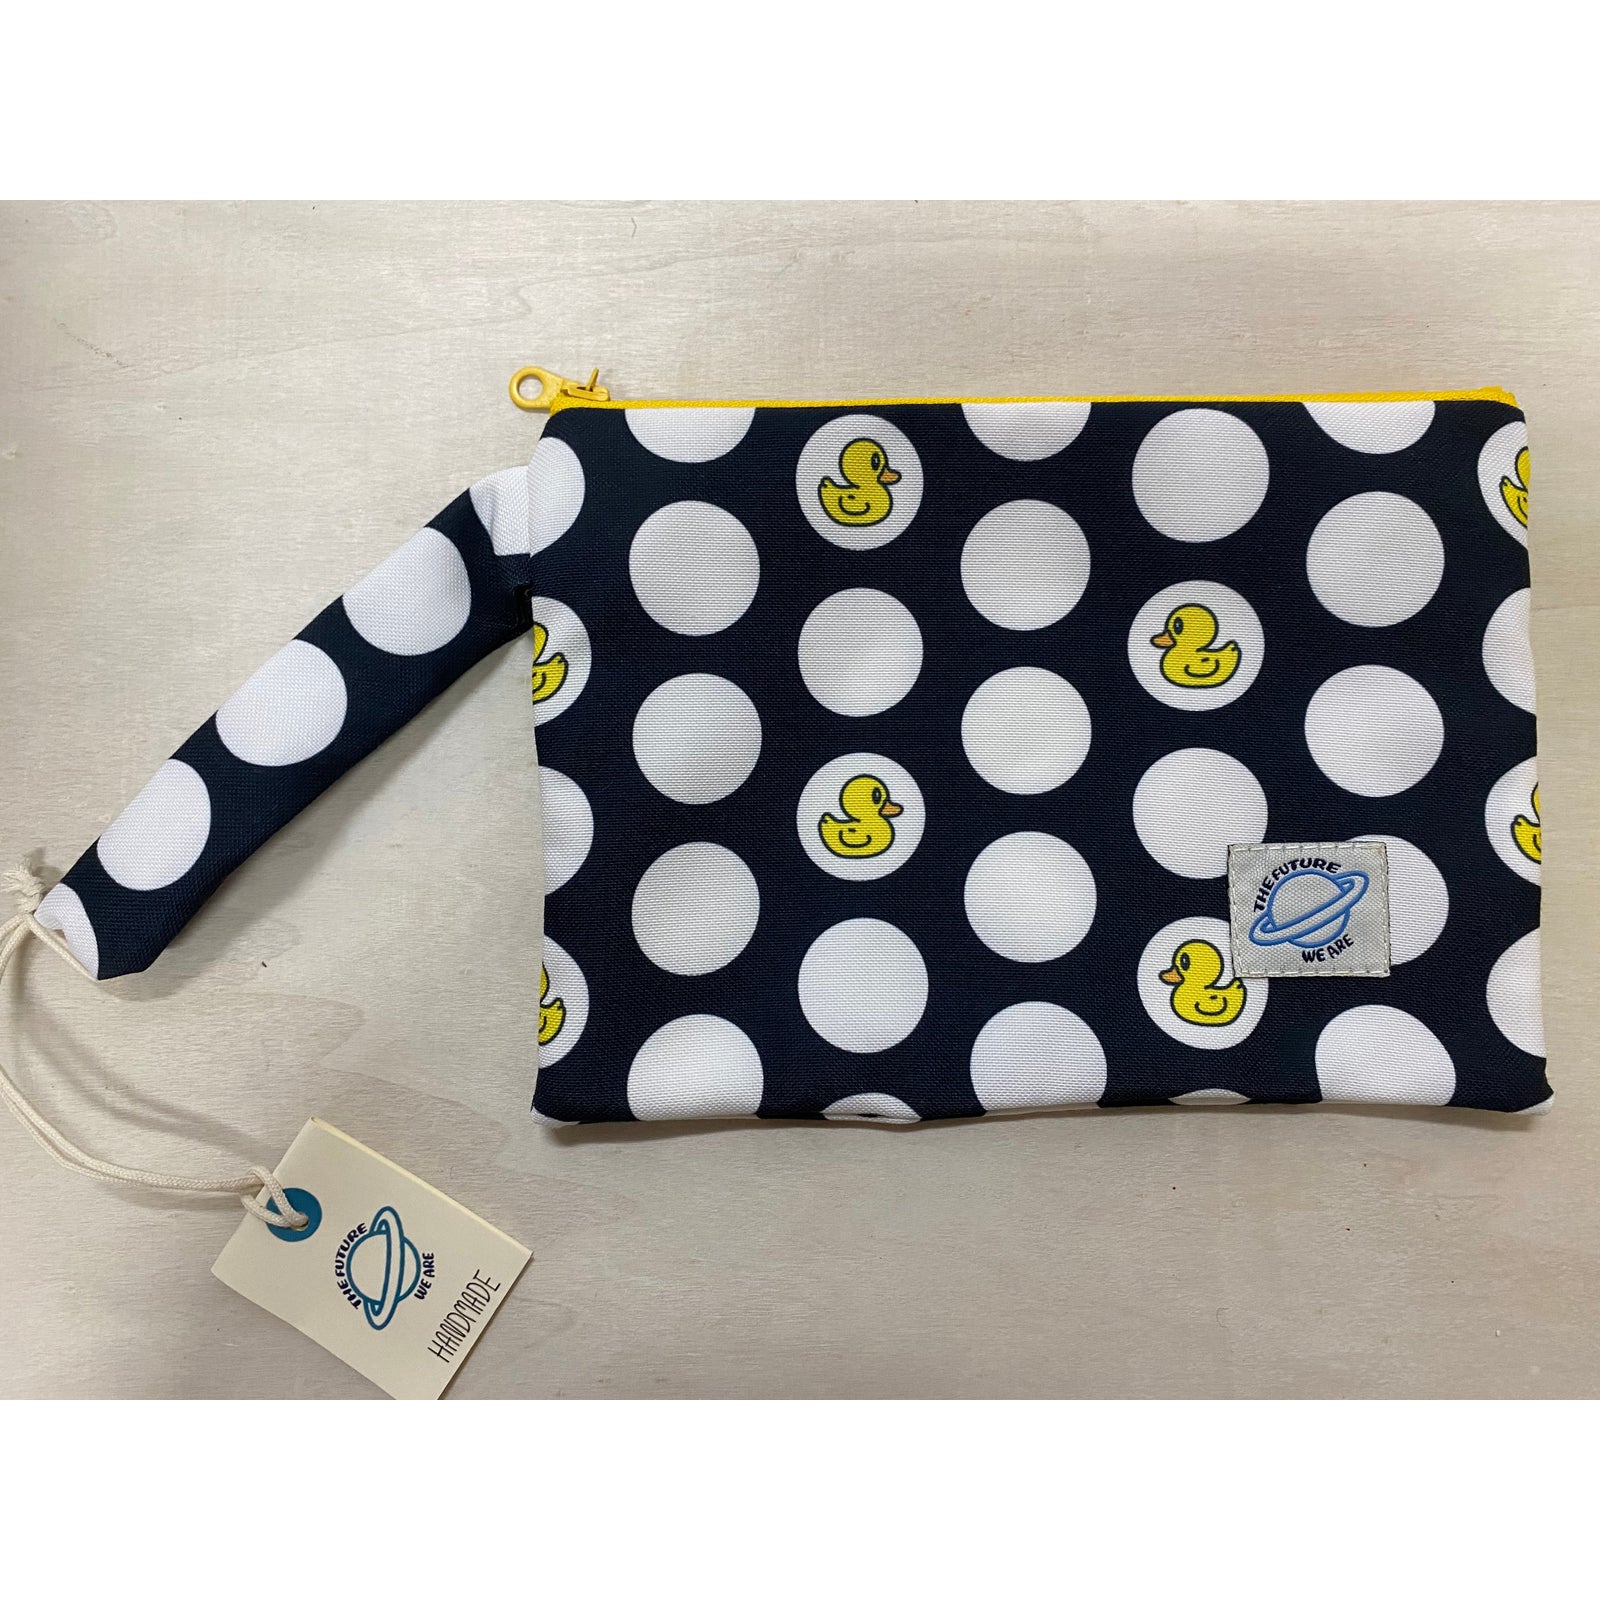 Large Clutch Bag - Ducky